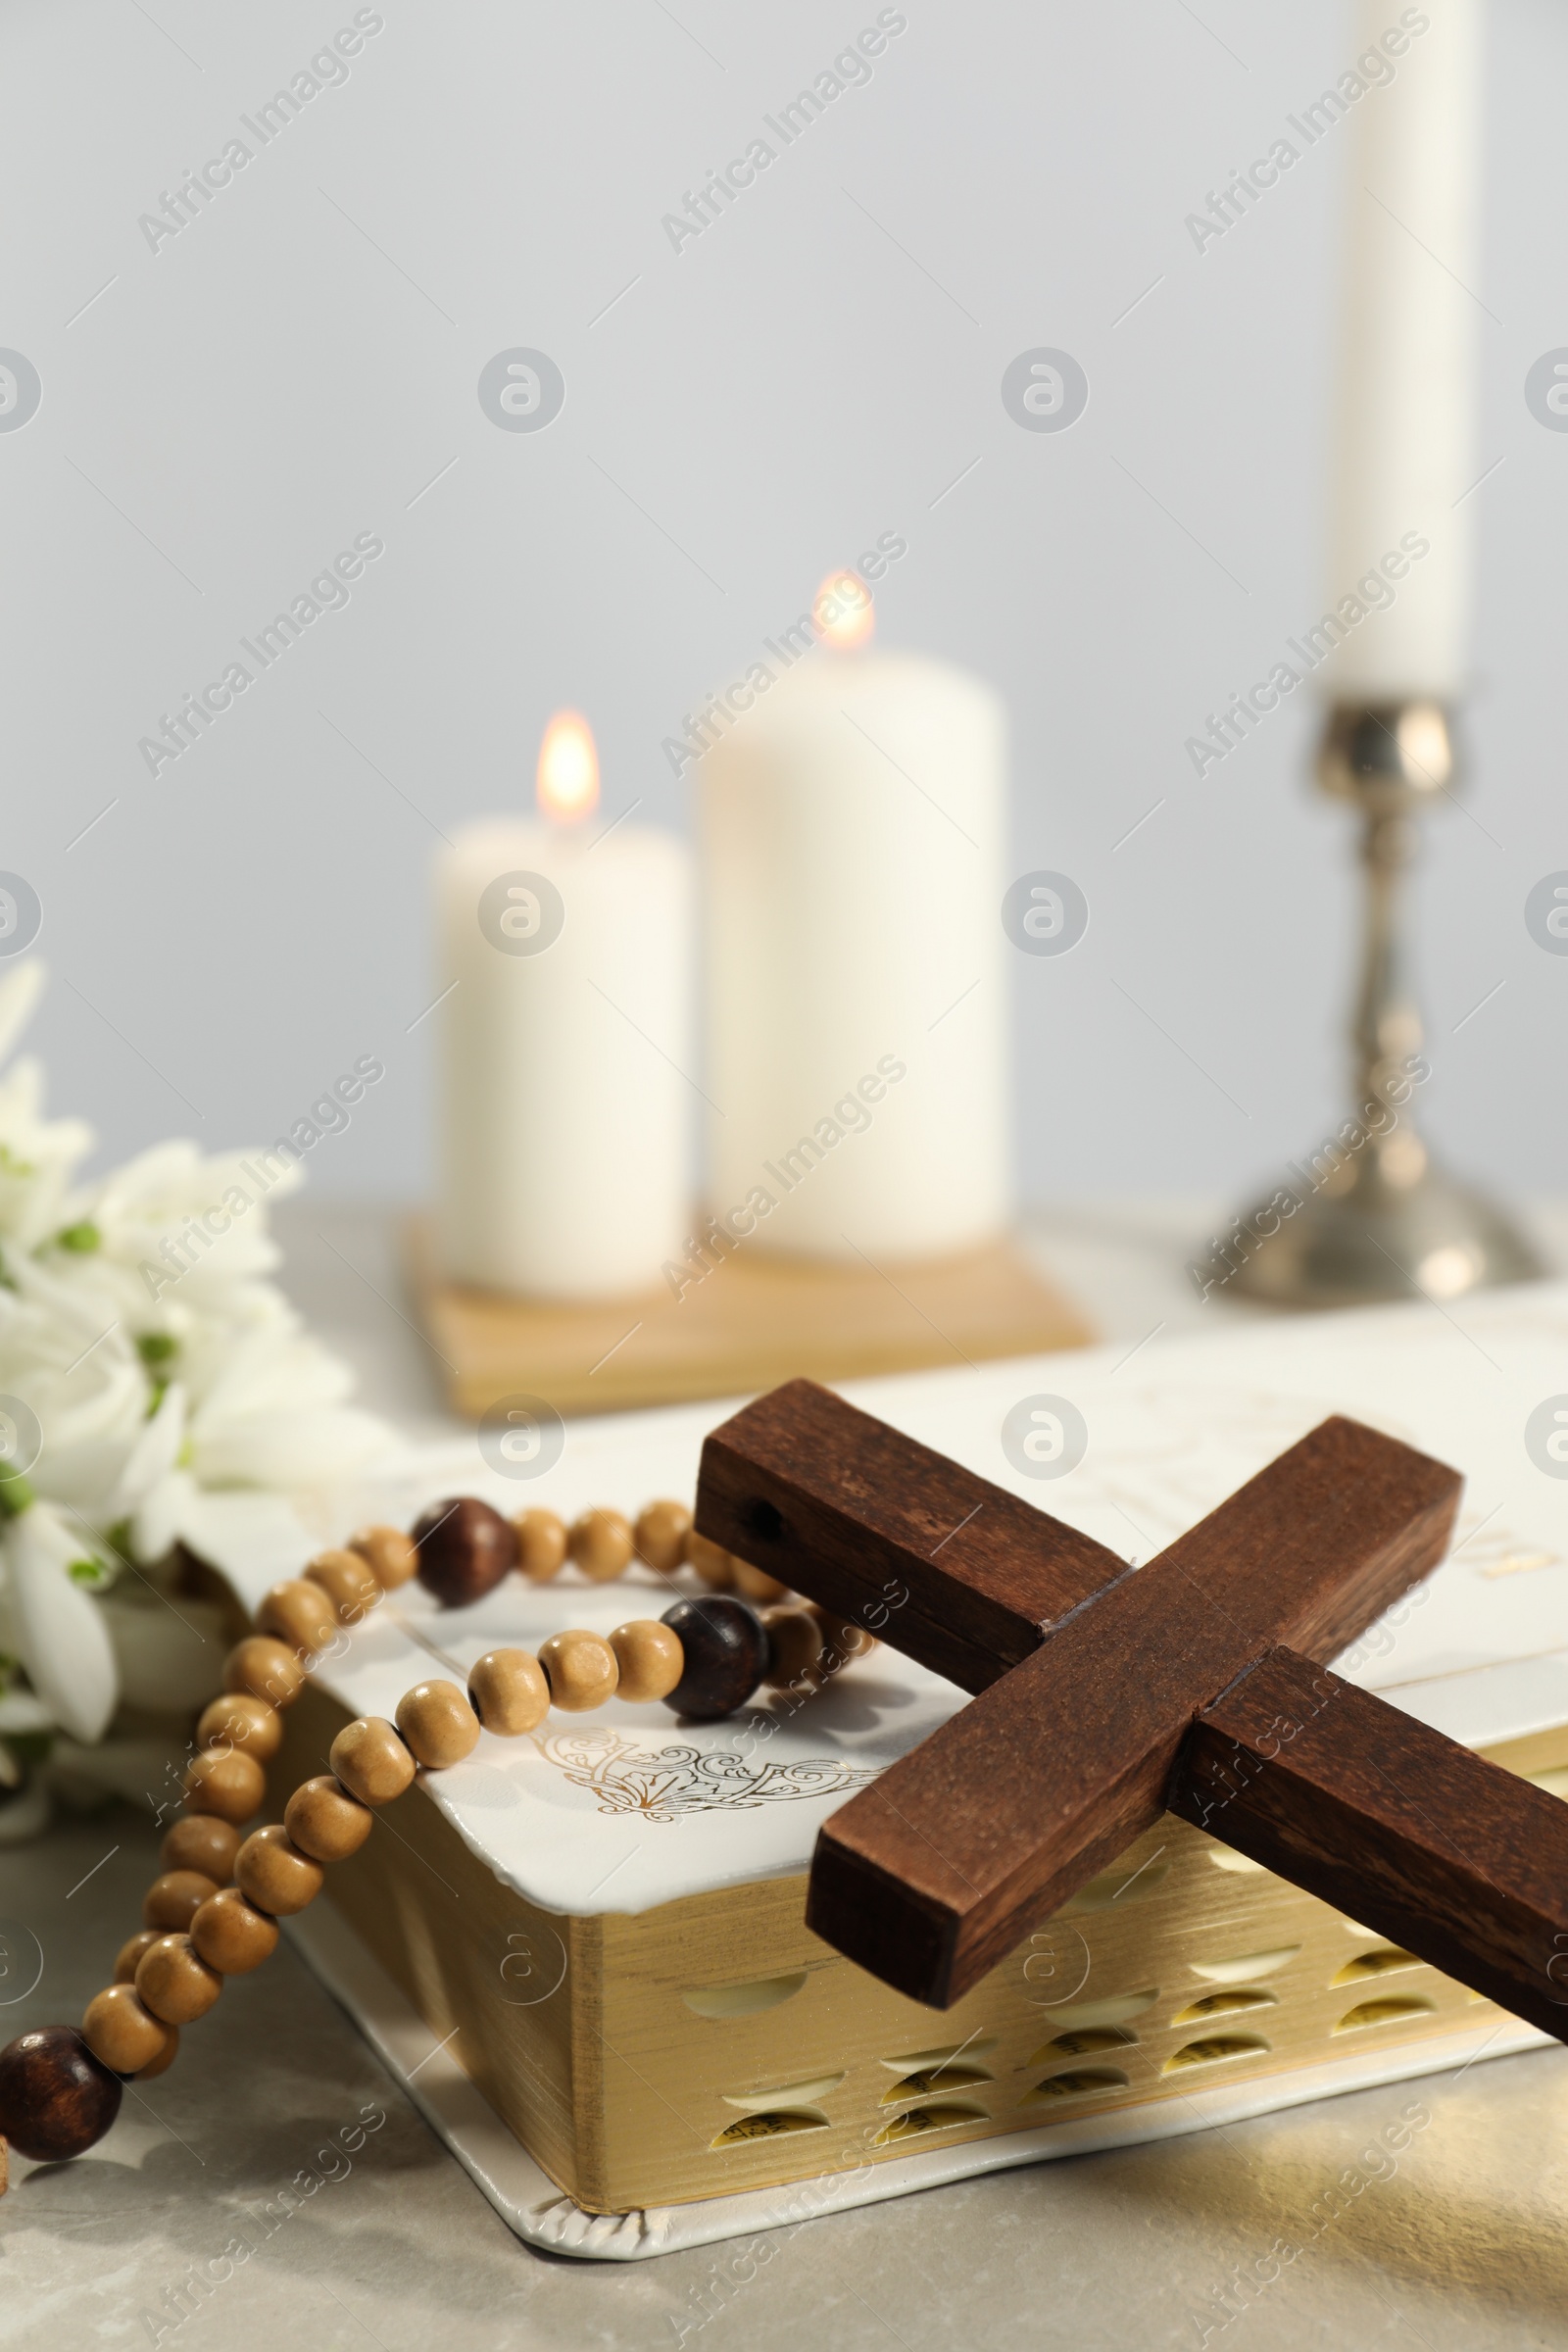 Photo of Wooden cross, Bible, rosary beads and church candles on light table, closeup